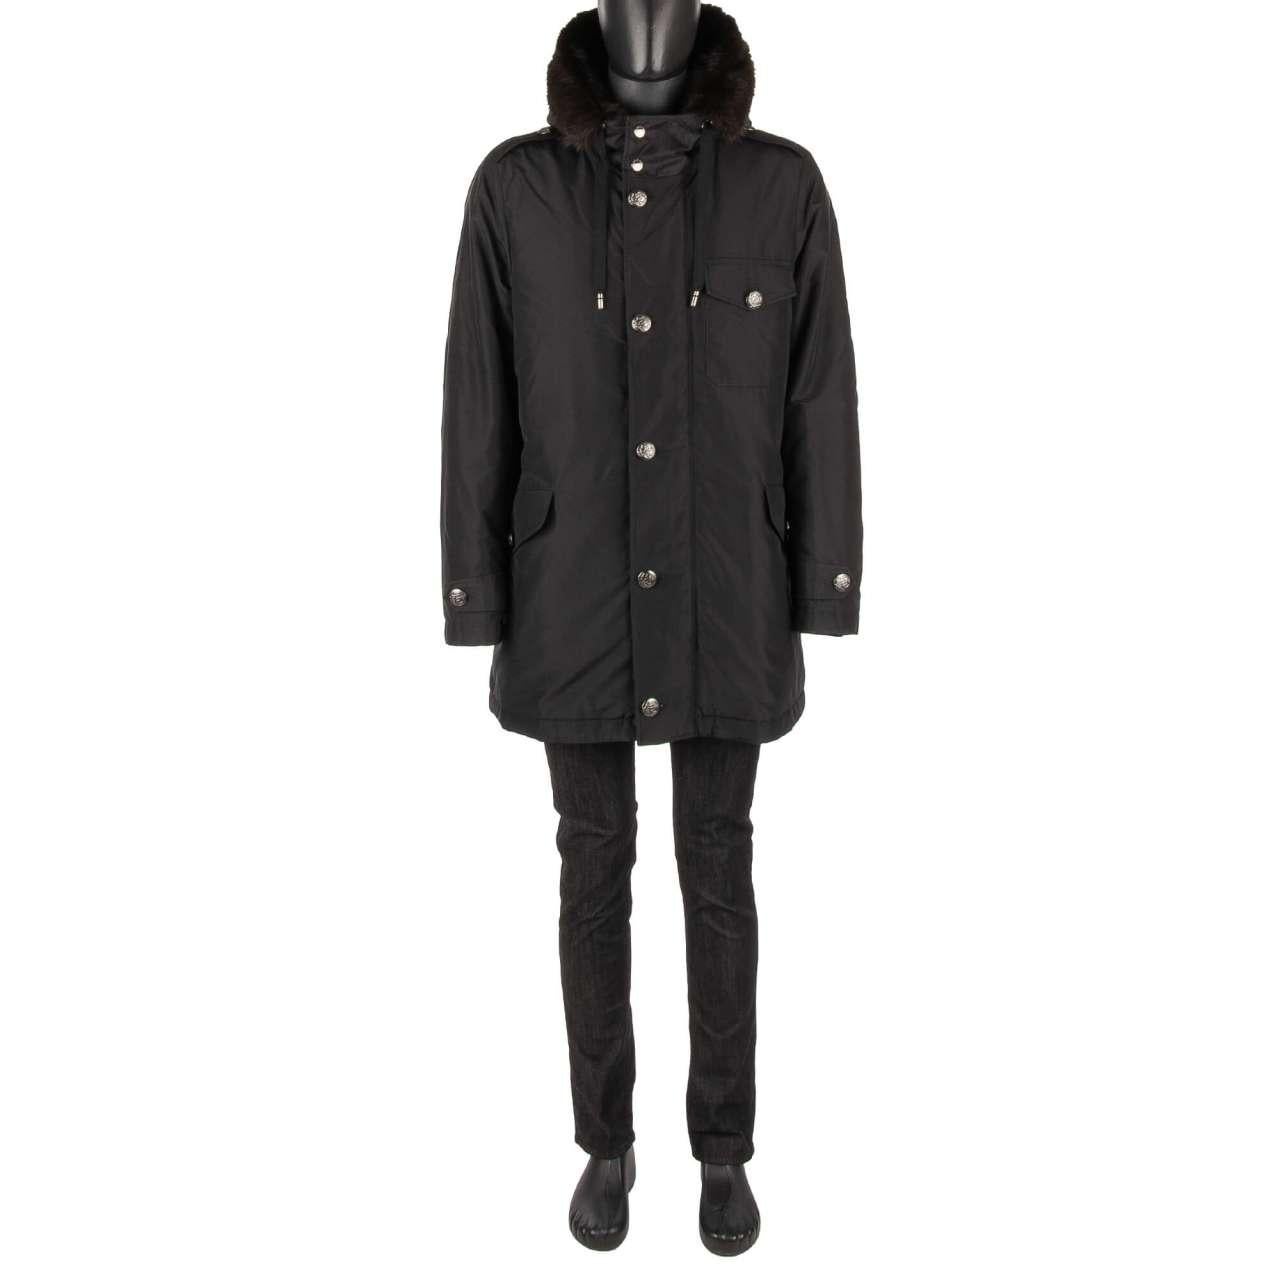 Dolce & Gabbana Silk Parka Jacket with Detachable Fur Lining and Hoody Black 48 For Sale 2